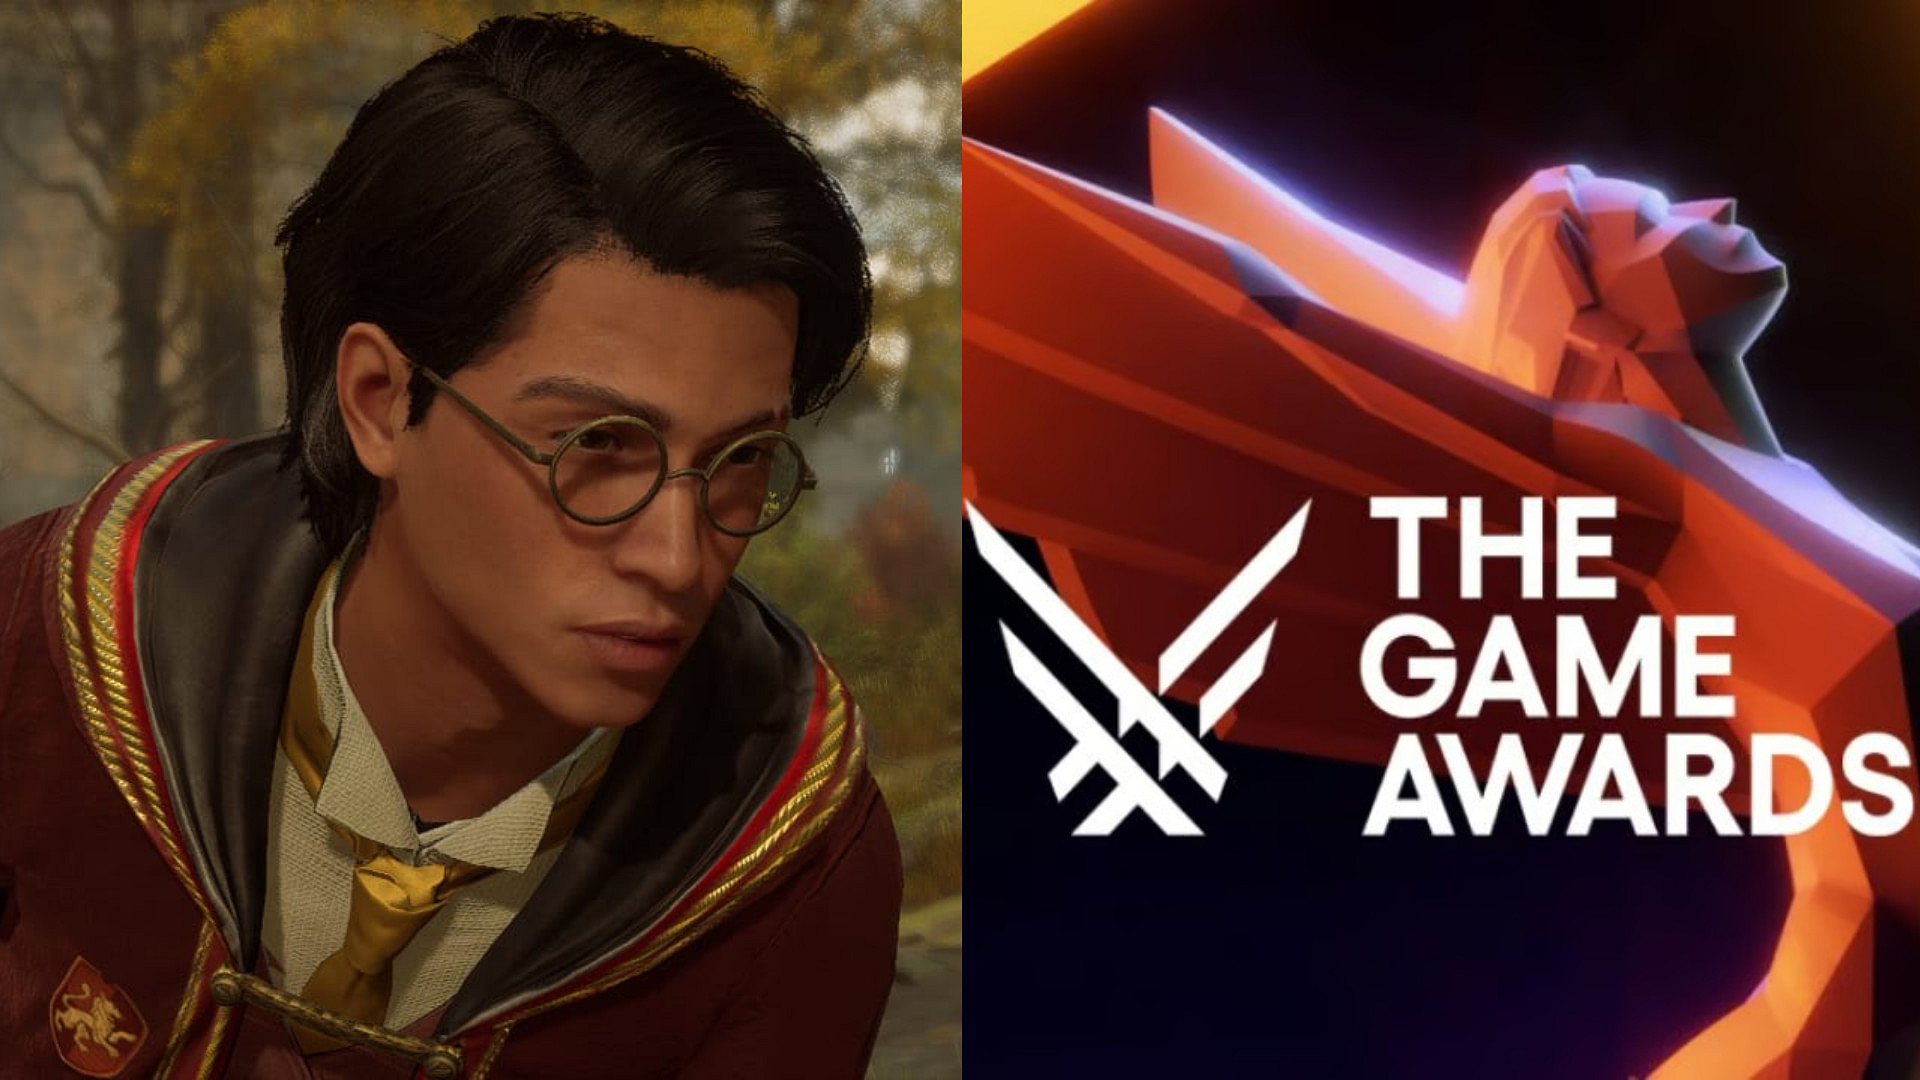 The Game Awards 2021 Nominations: Biggest Snubs and Surprises